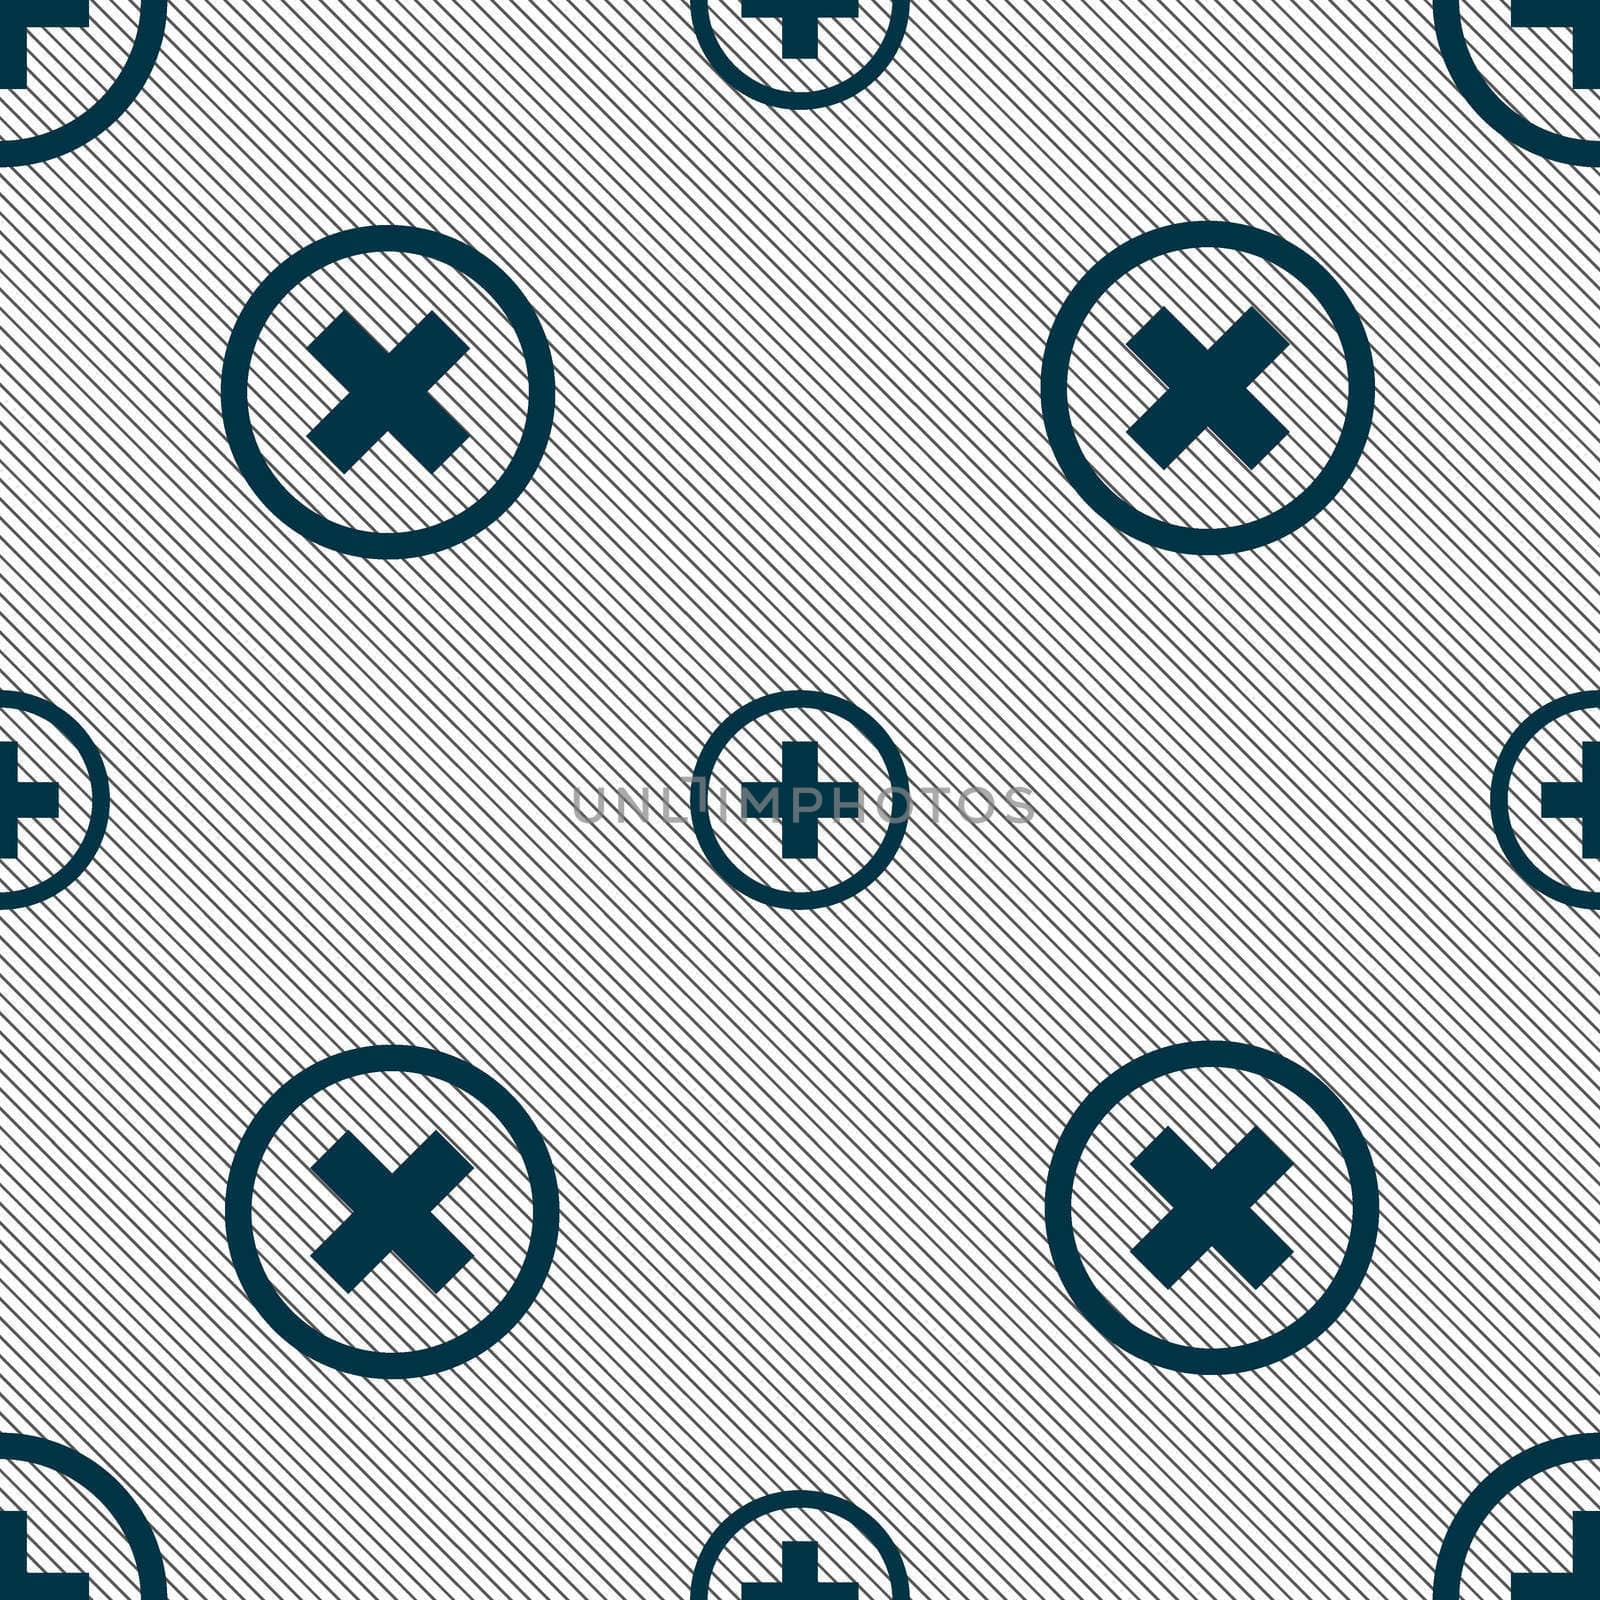 Plus sign icon. Positive symbol. Zoom in. Seamless pattern with geometric texture. illustration